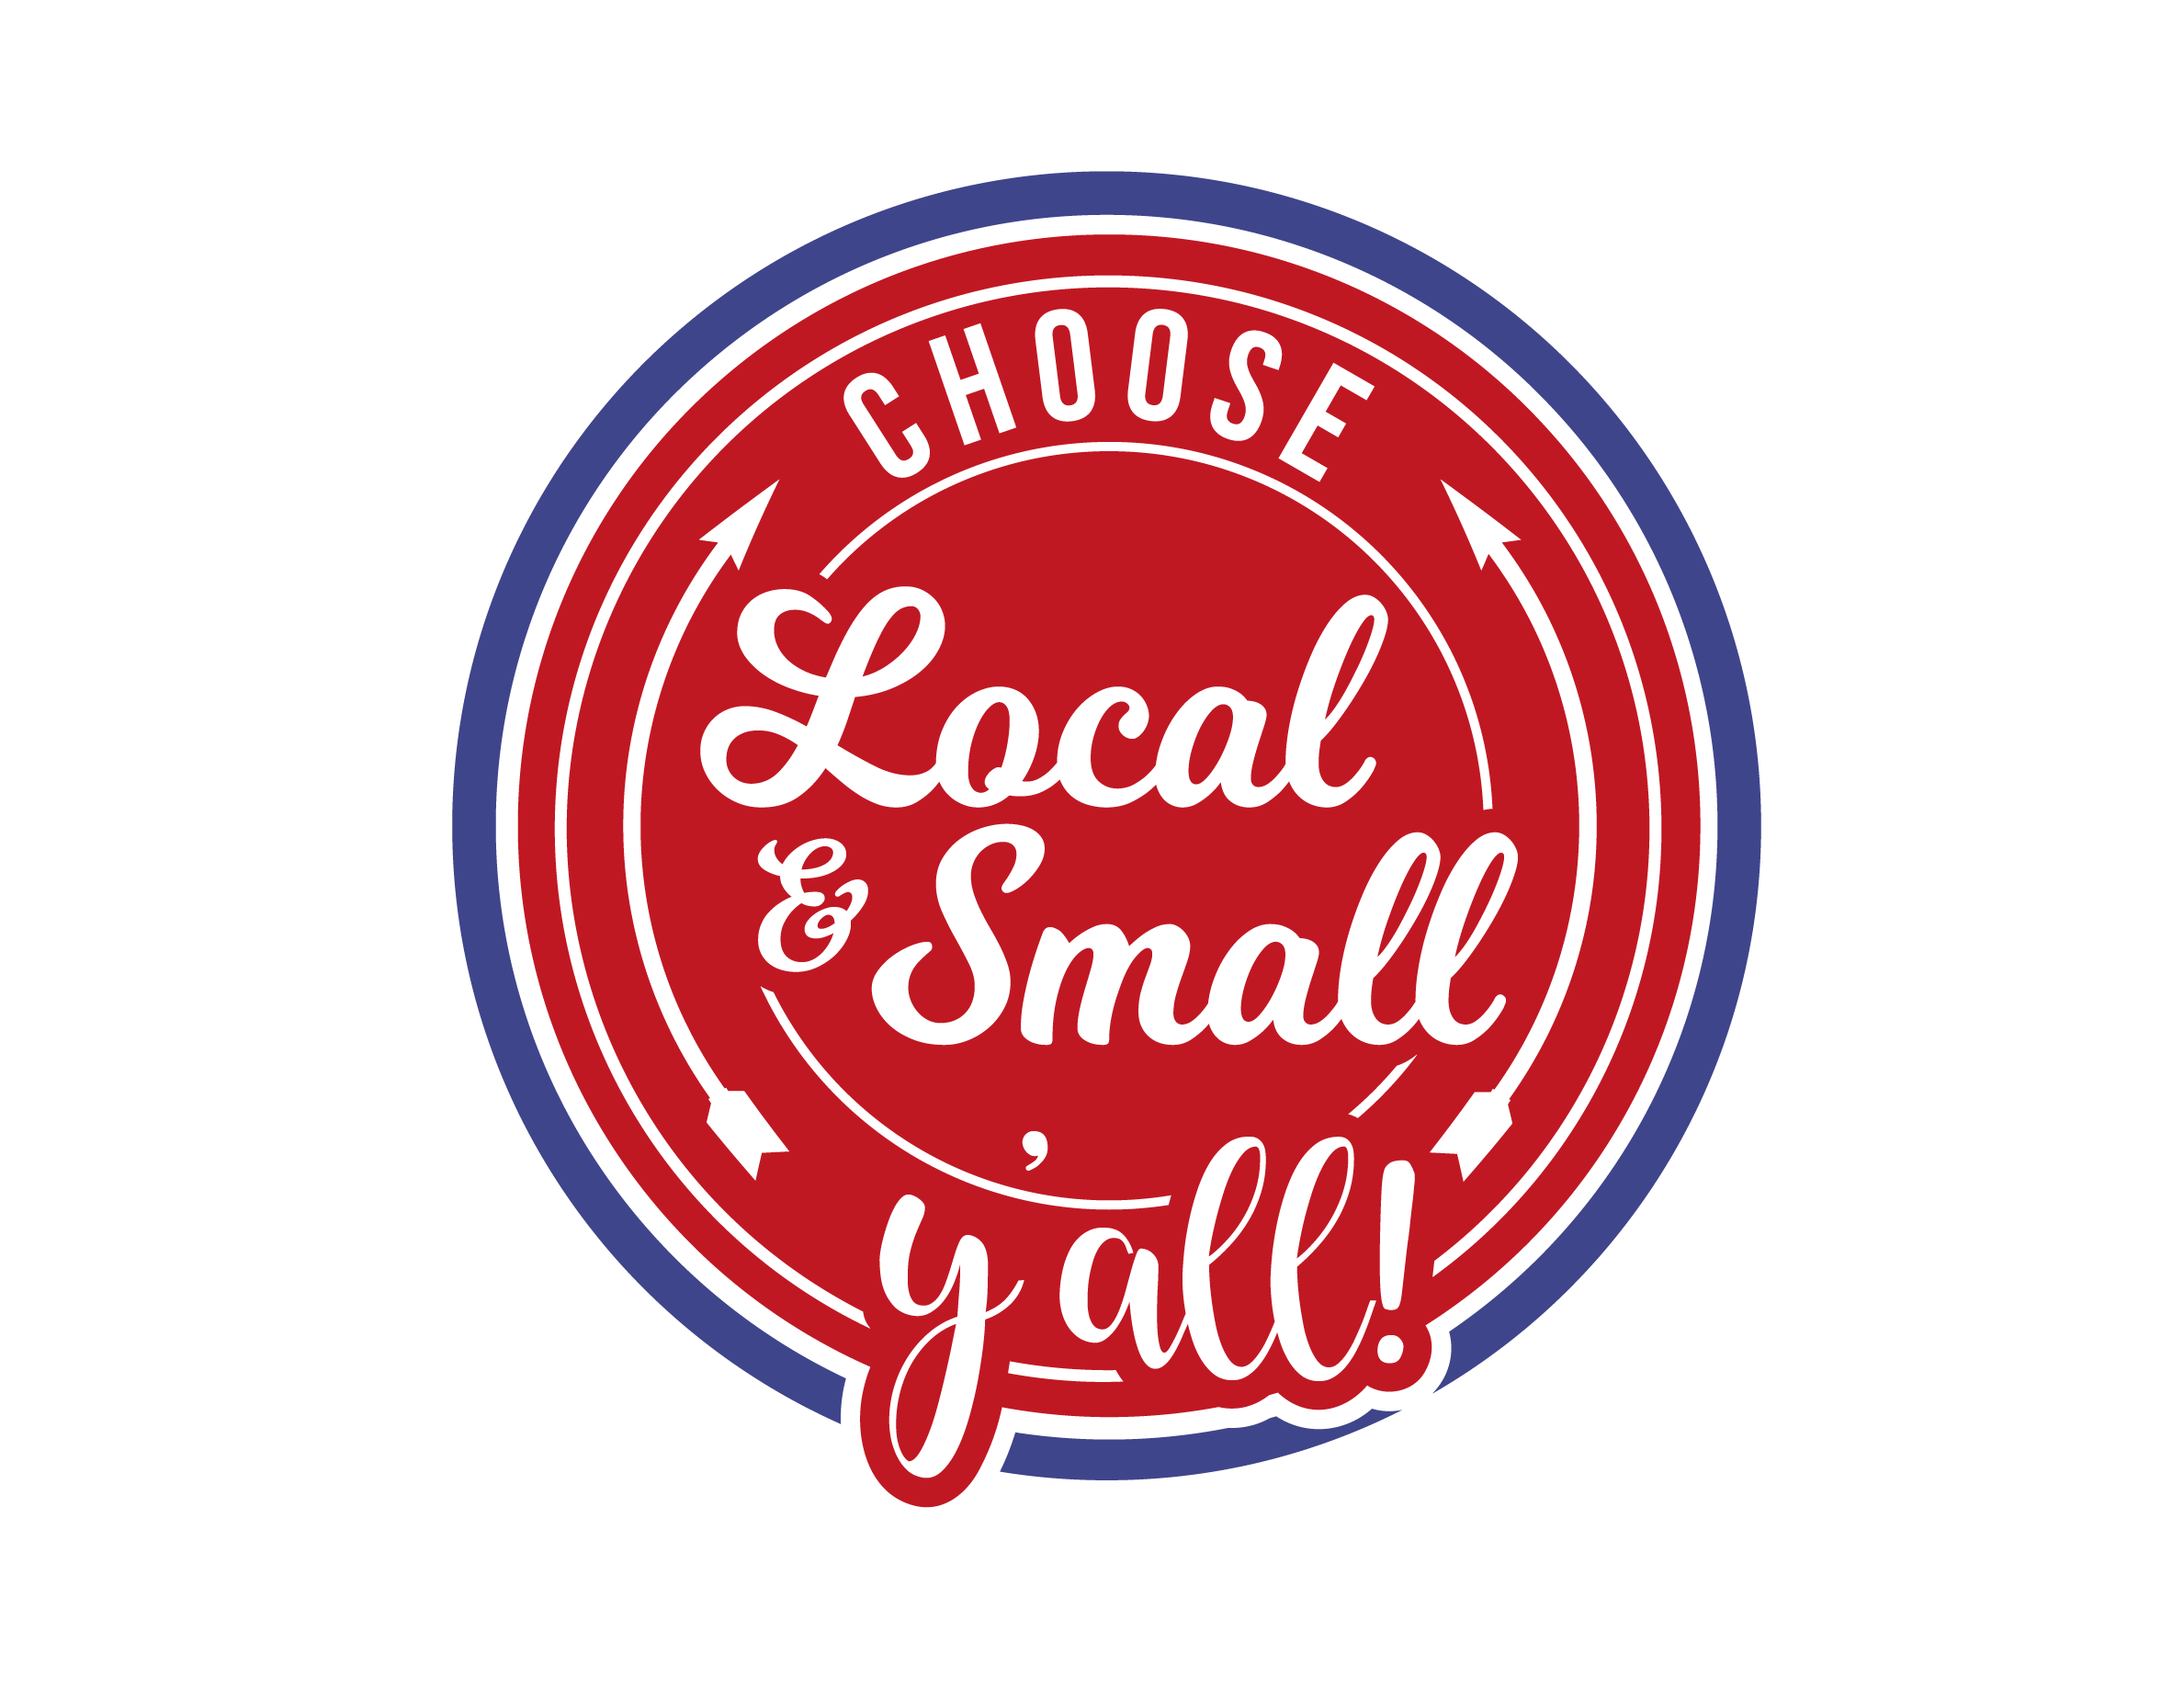 Choose Local and Small Y’all logo